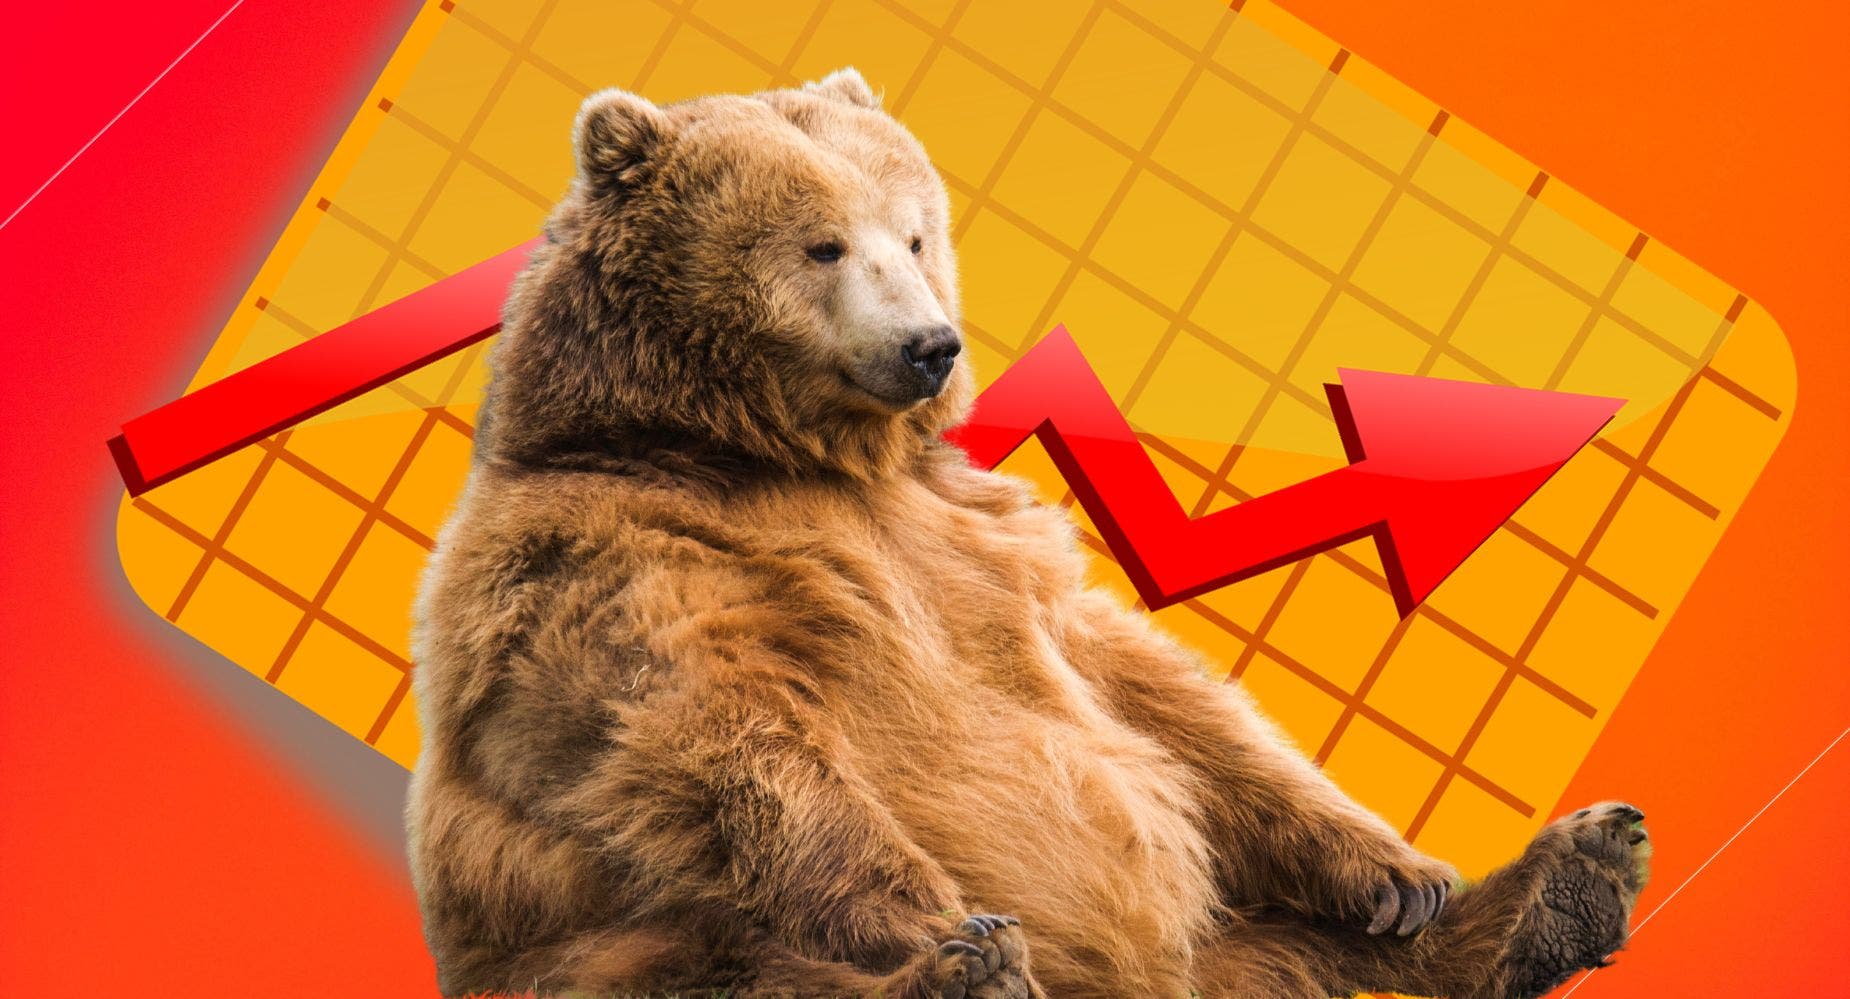 Short Sellers Are Ramping Up Their Bets Against Tech Stocks: Analyst Says This May Be A 'Bear Rally'